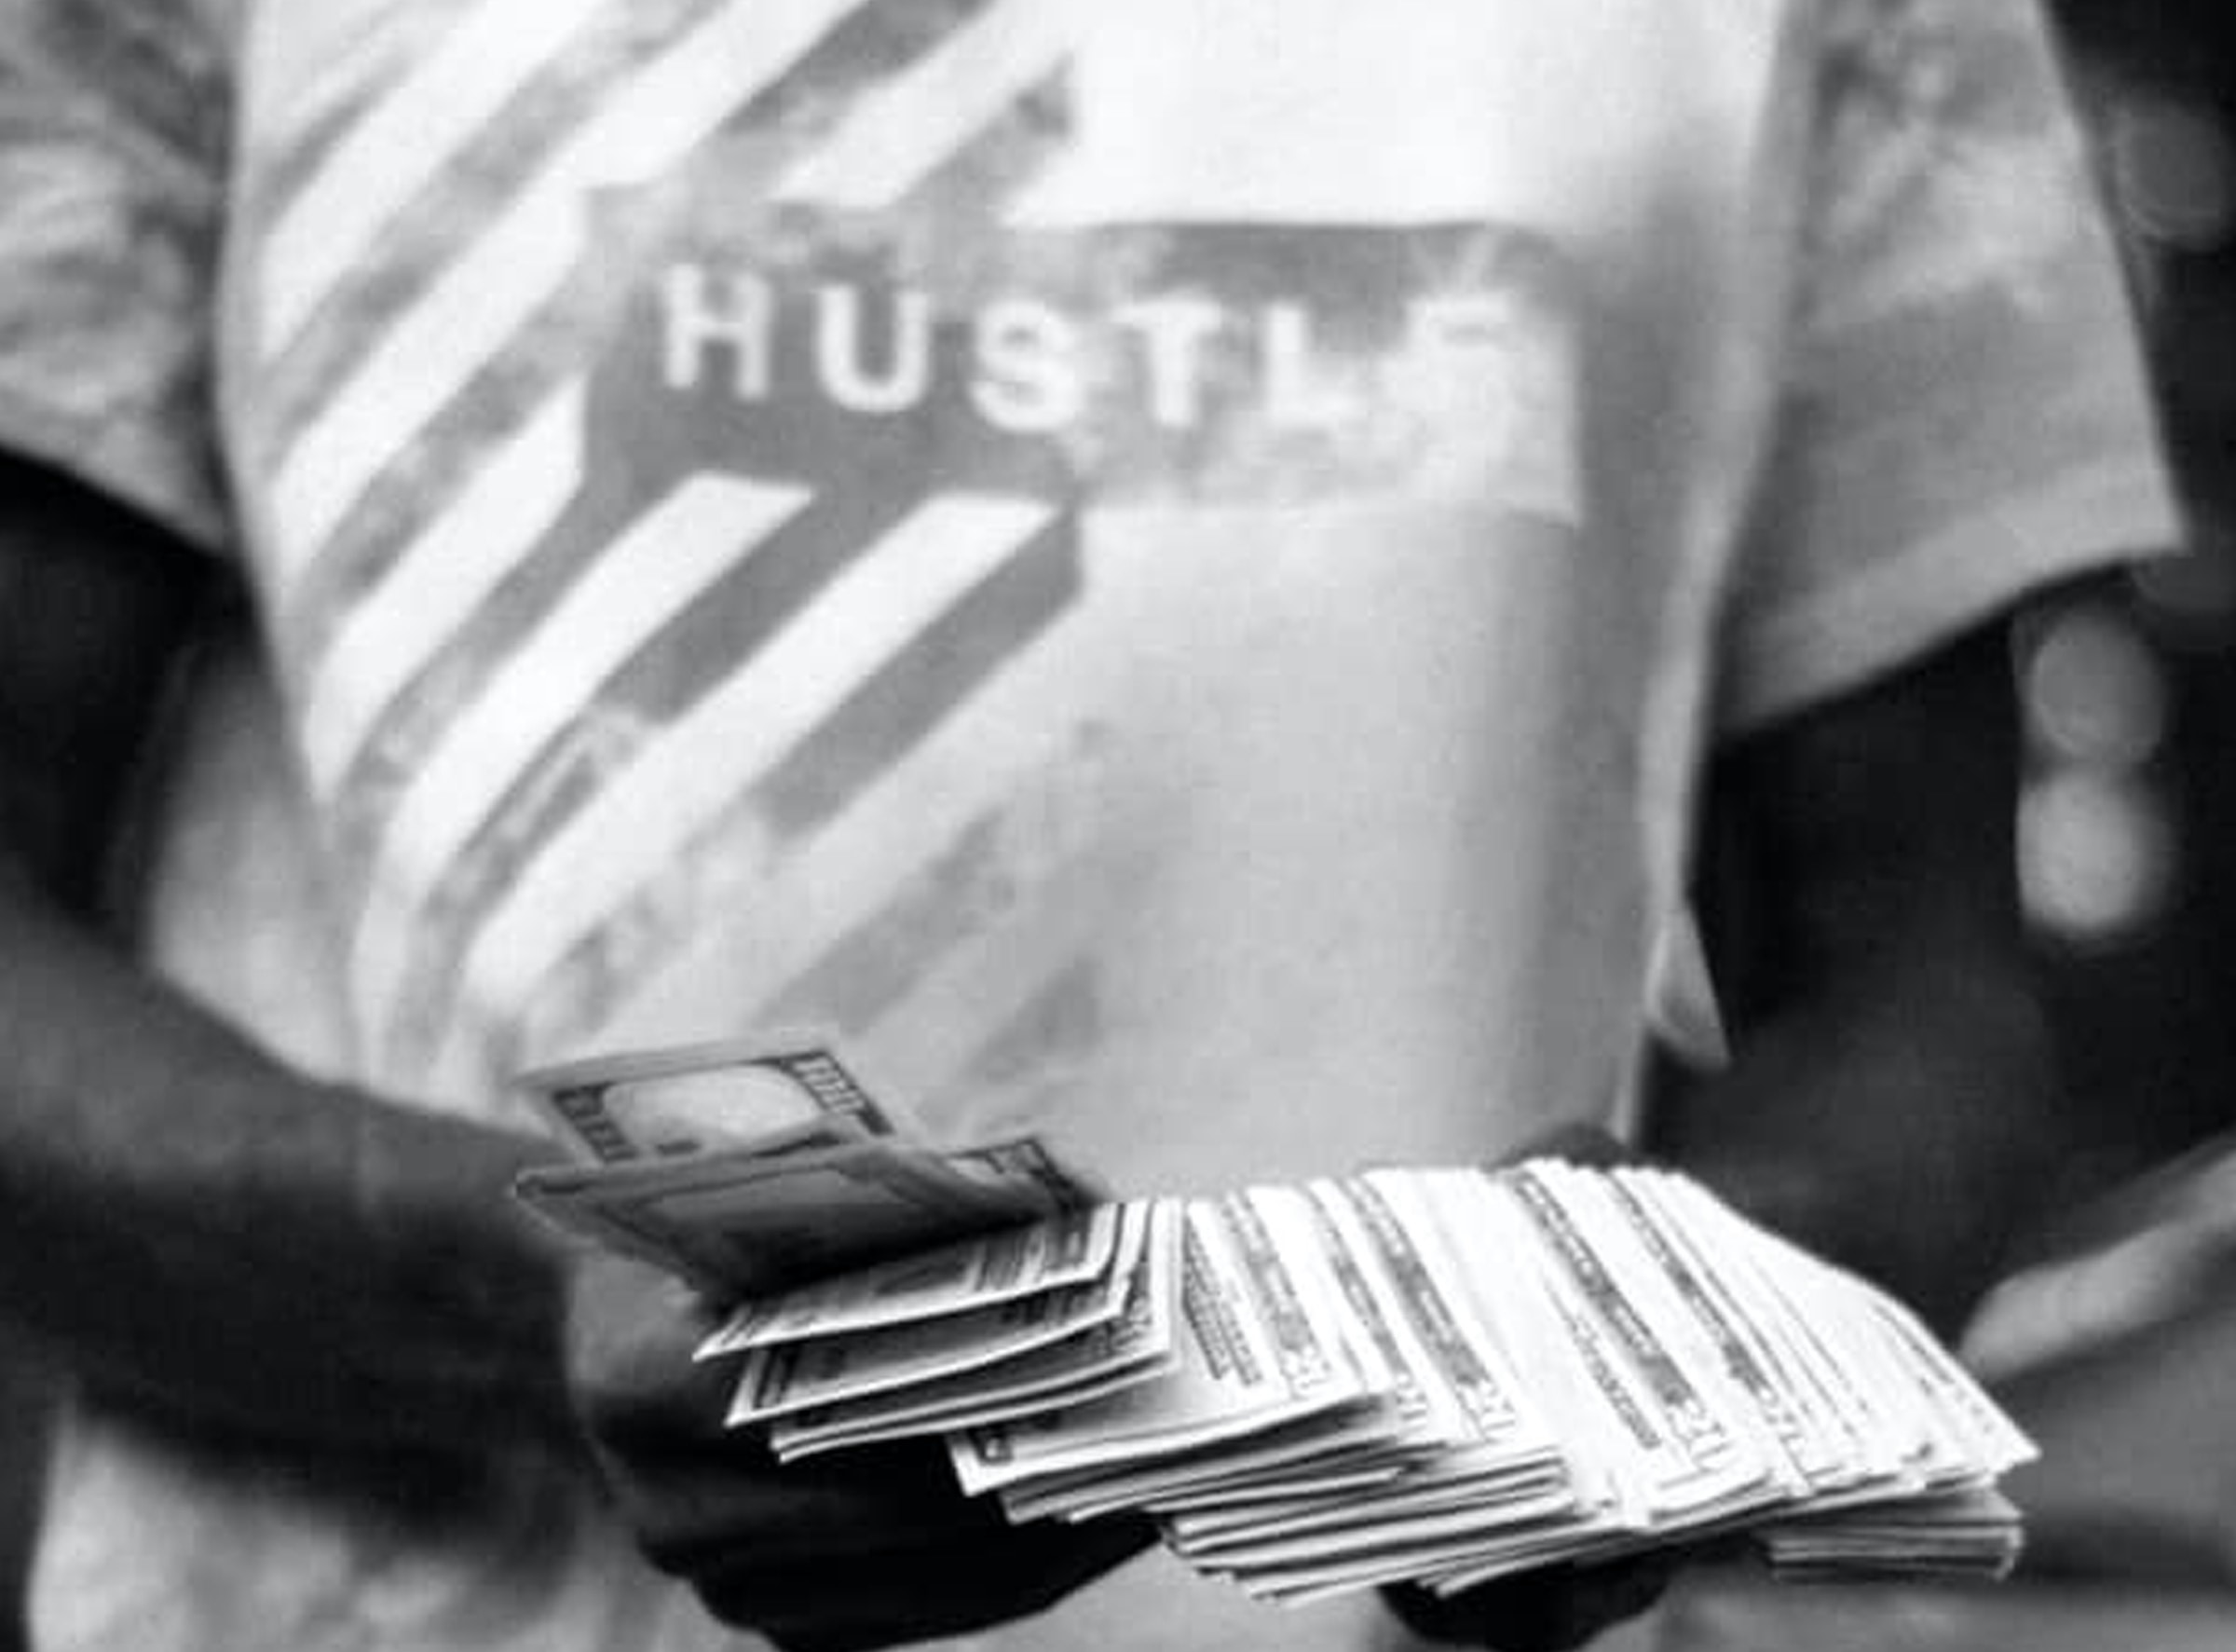 How to make substantial and consistent income from a side hustle. by Tom Jawado 